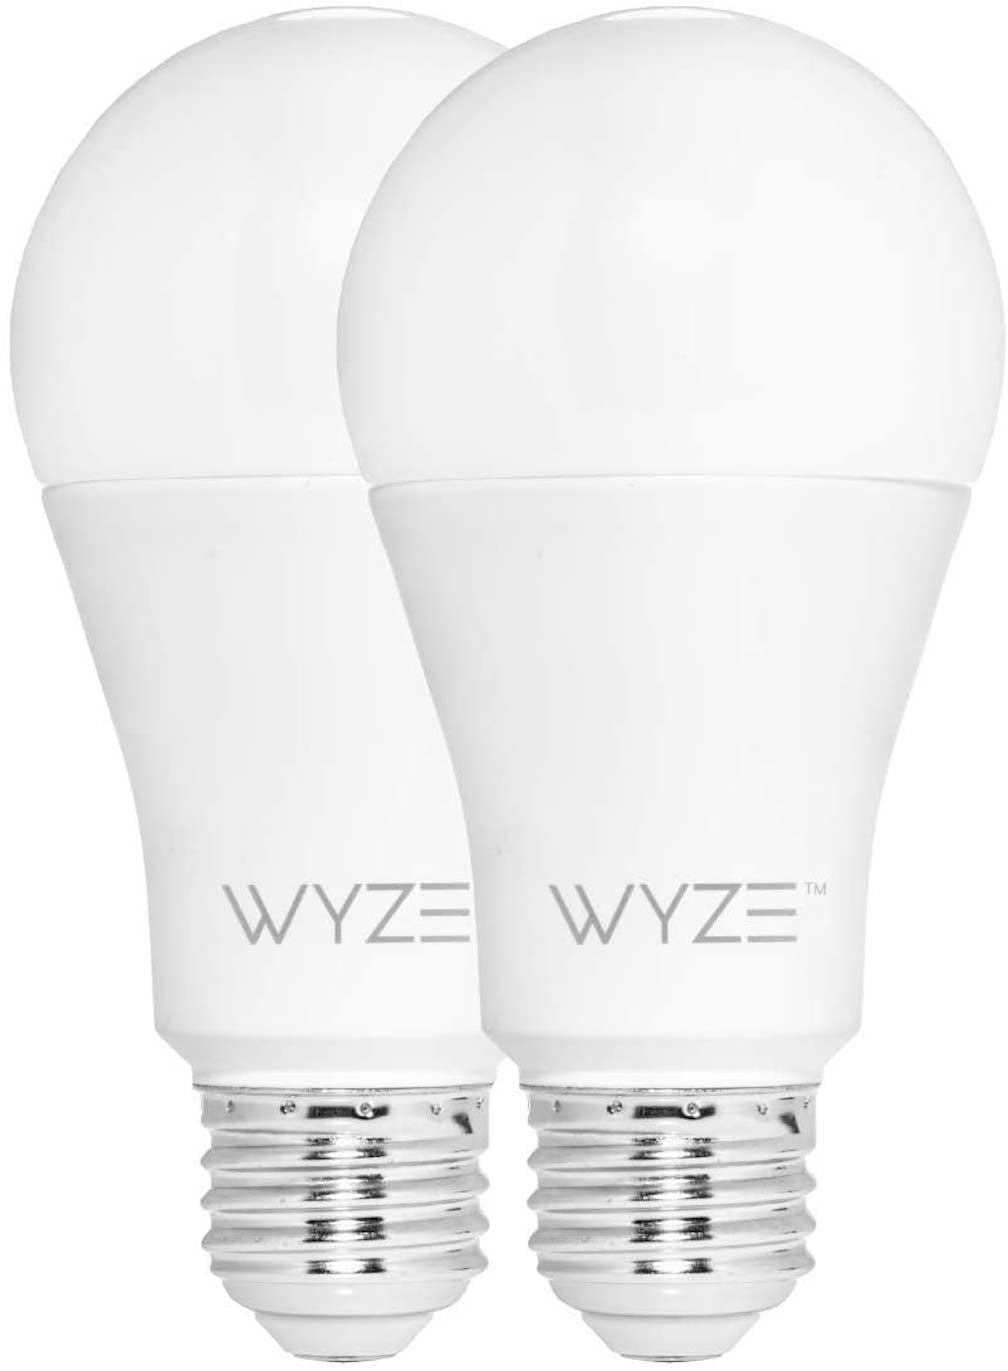 Wyze LED 9.5W (60W Equivalent) White Smart Home Light Bulb, Dimmable 2 Pack